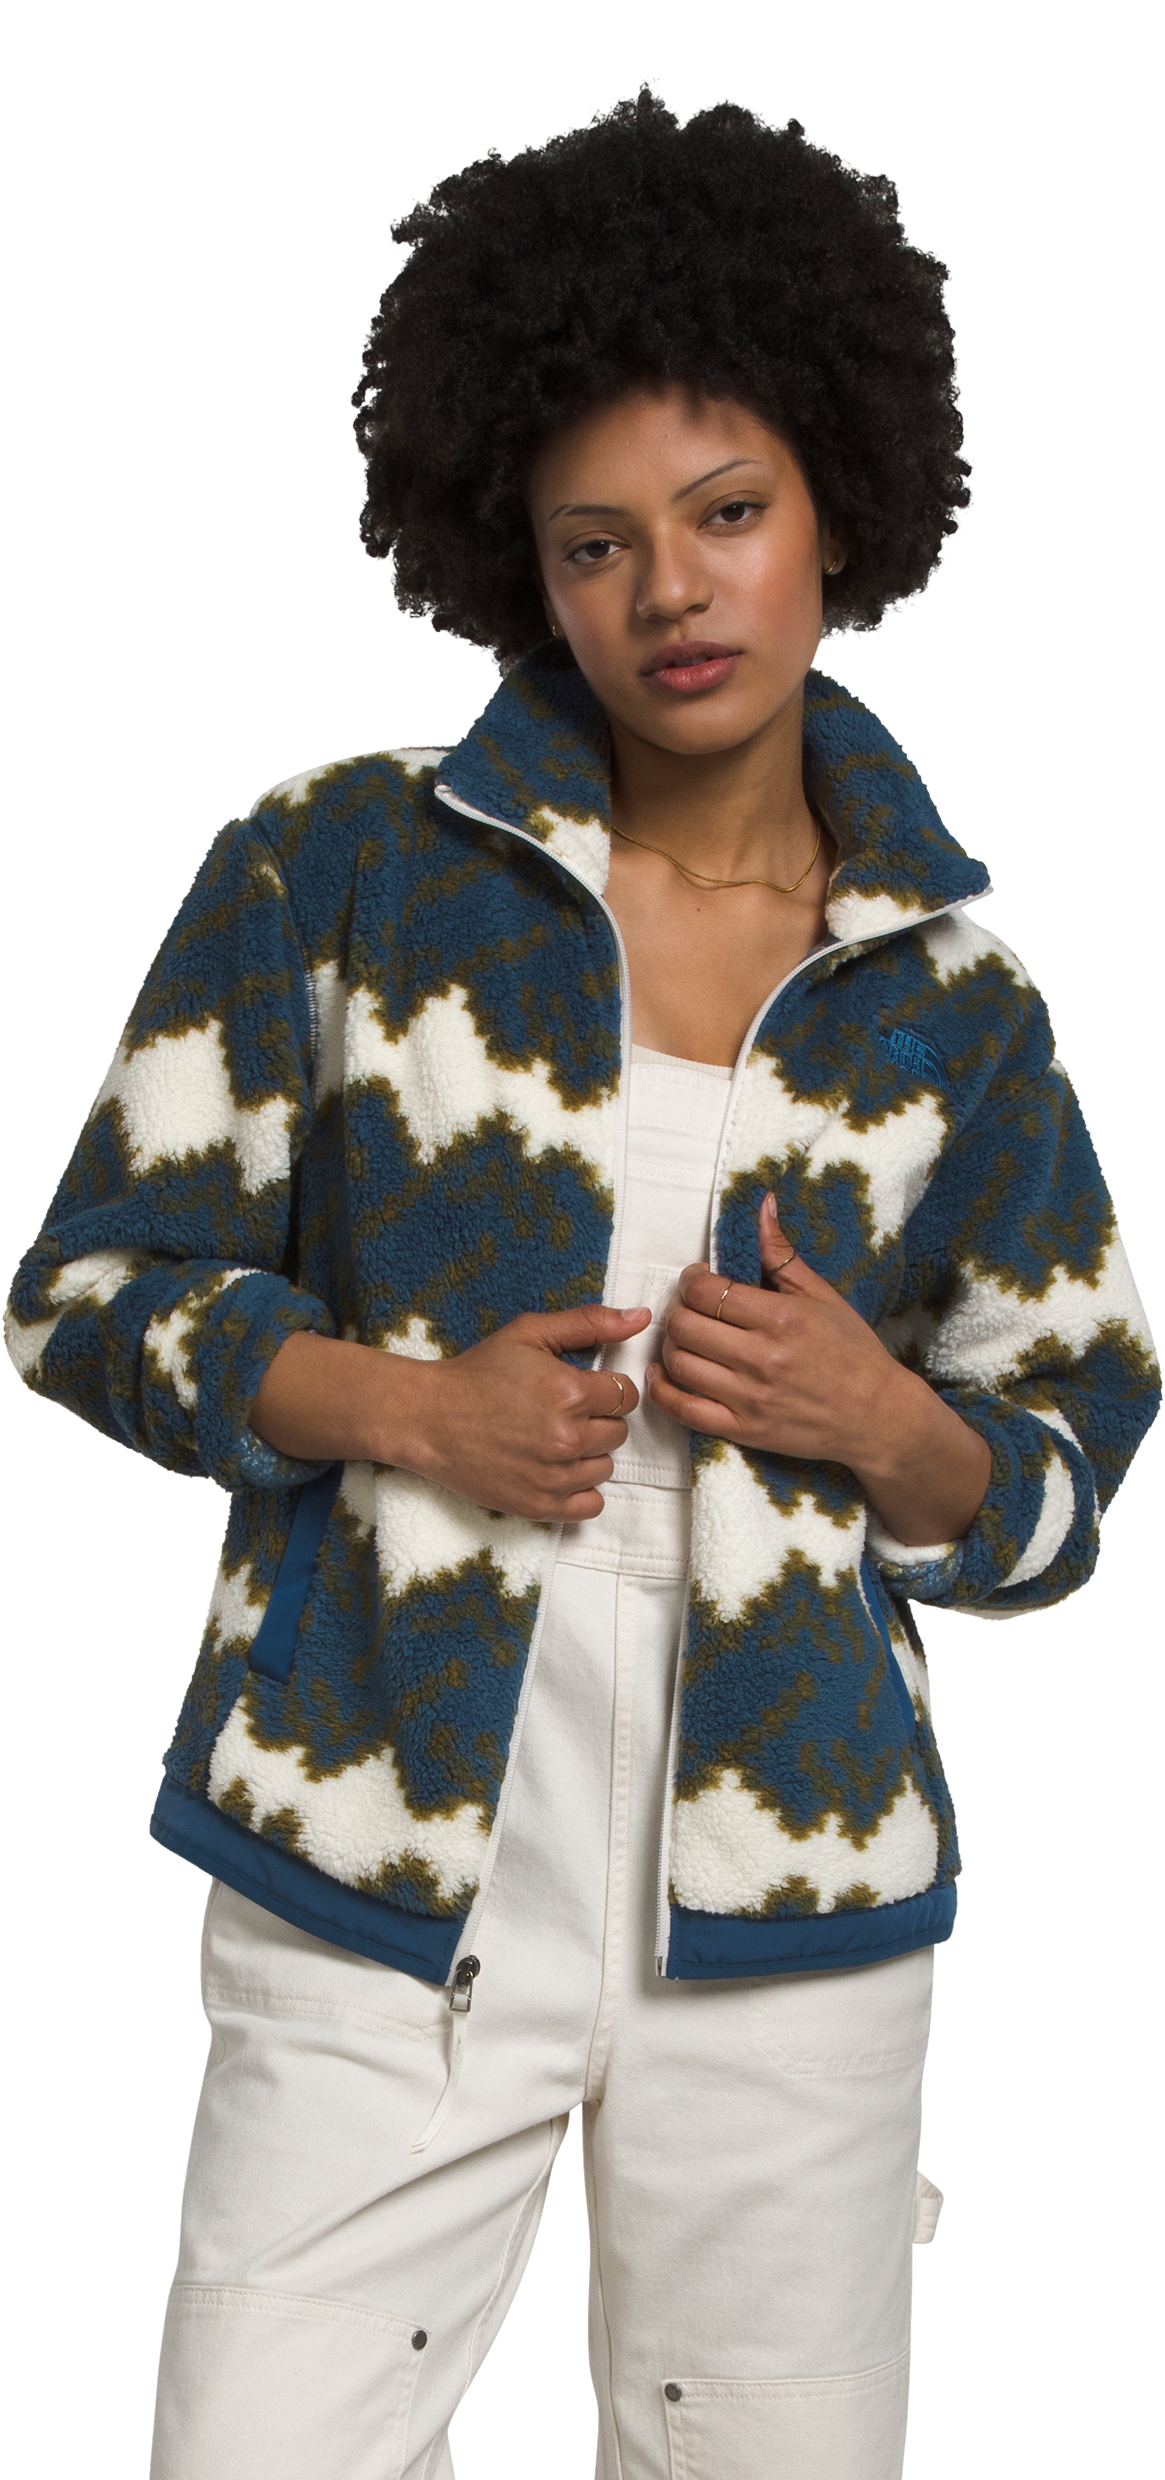 The North Face Campshire Fleece Jacket for Ladies - Shady Blue Mountain Geo Print - XL